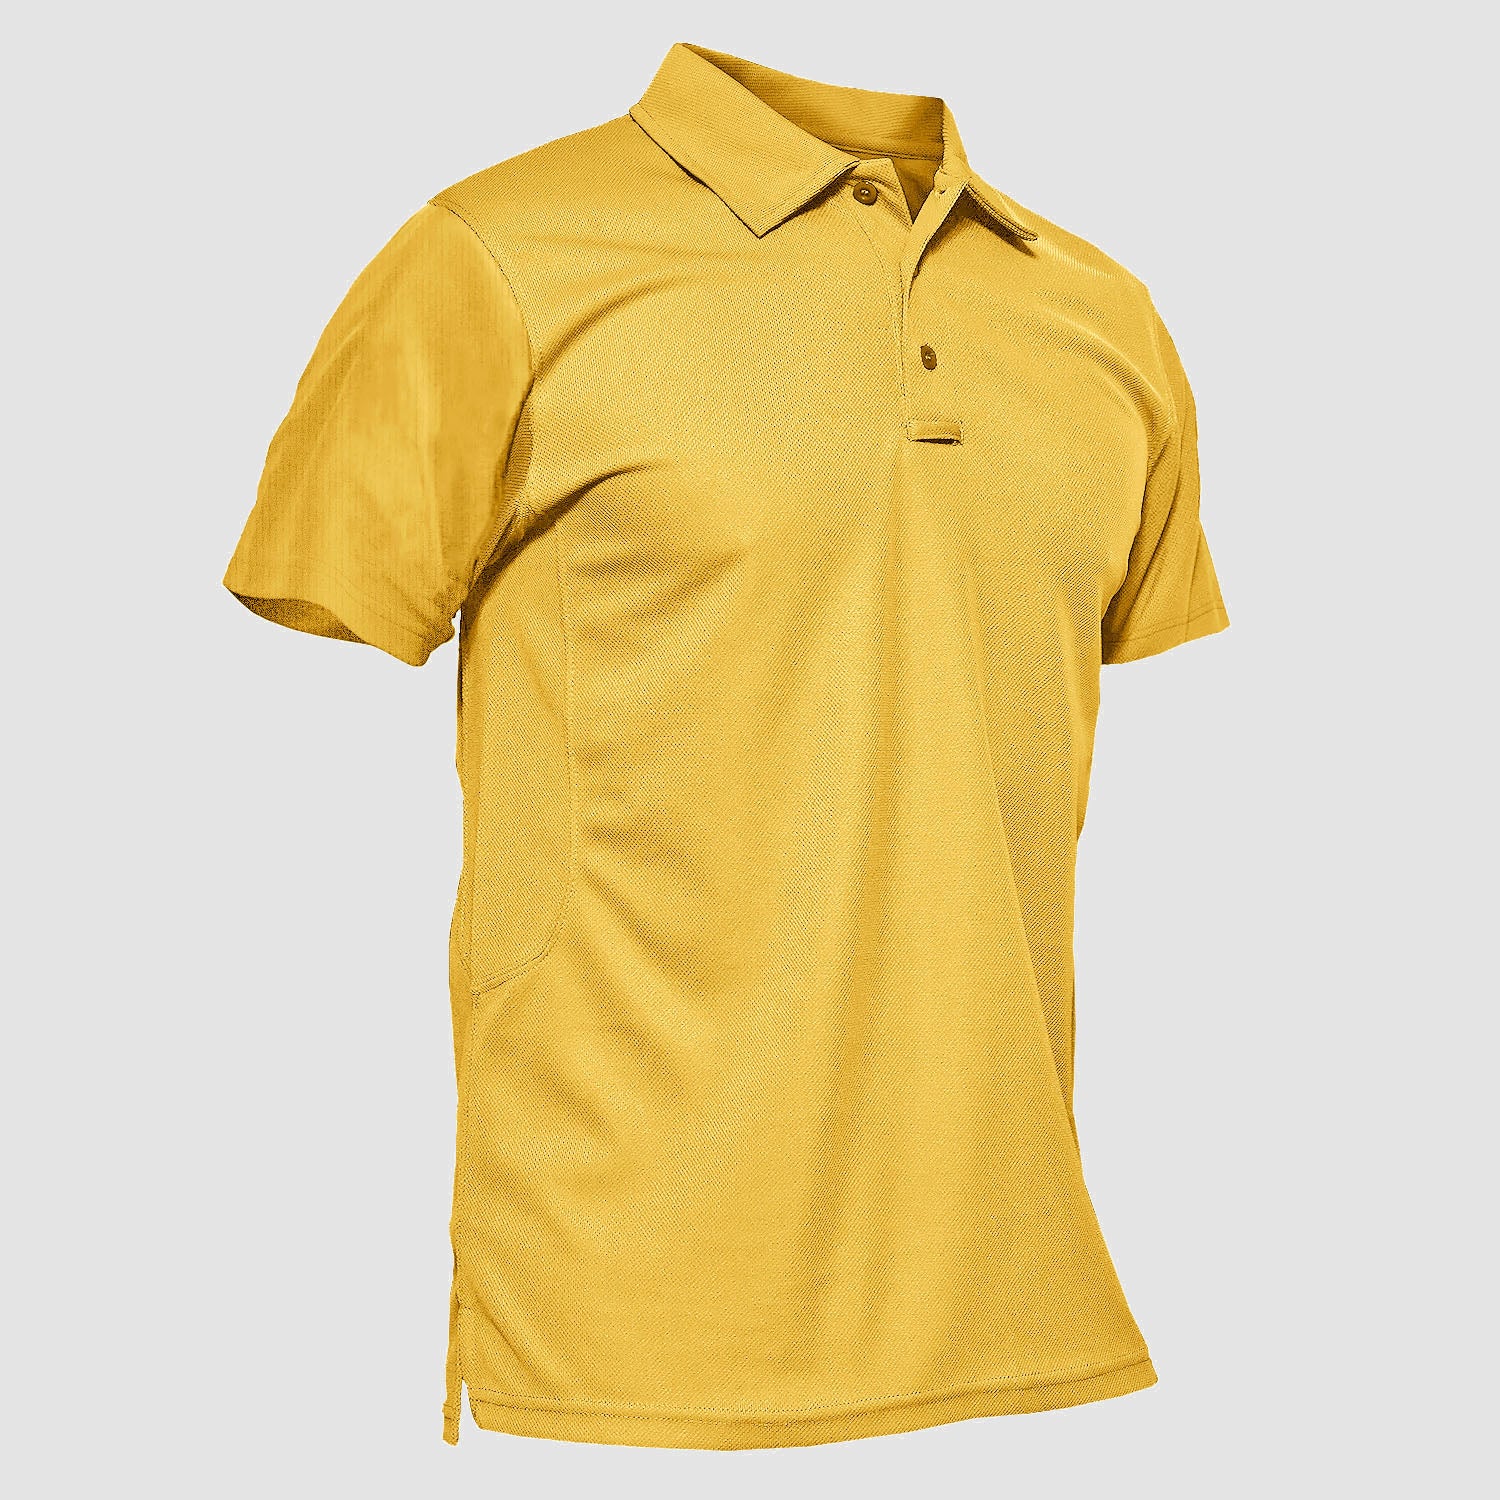 【Buy 4 Get the 4th Free】Men's Quick Dry Polo T-shirts Short Sleeve Shirt